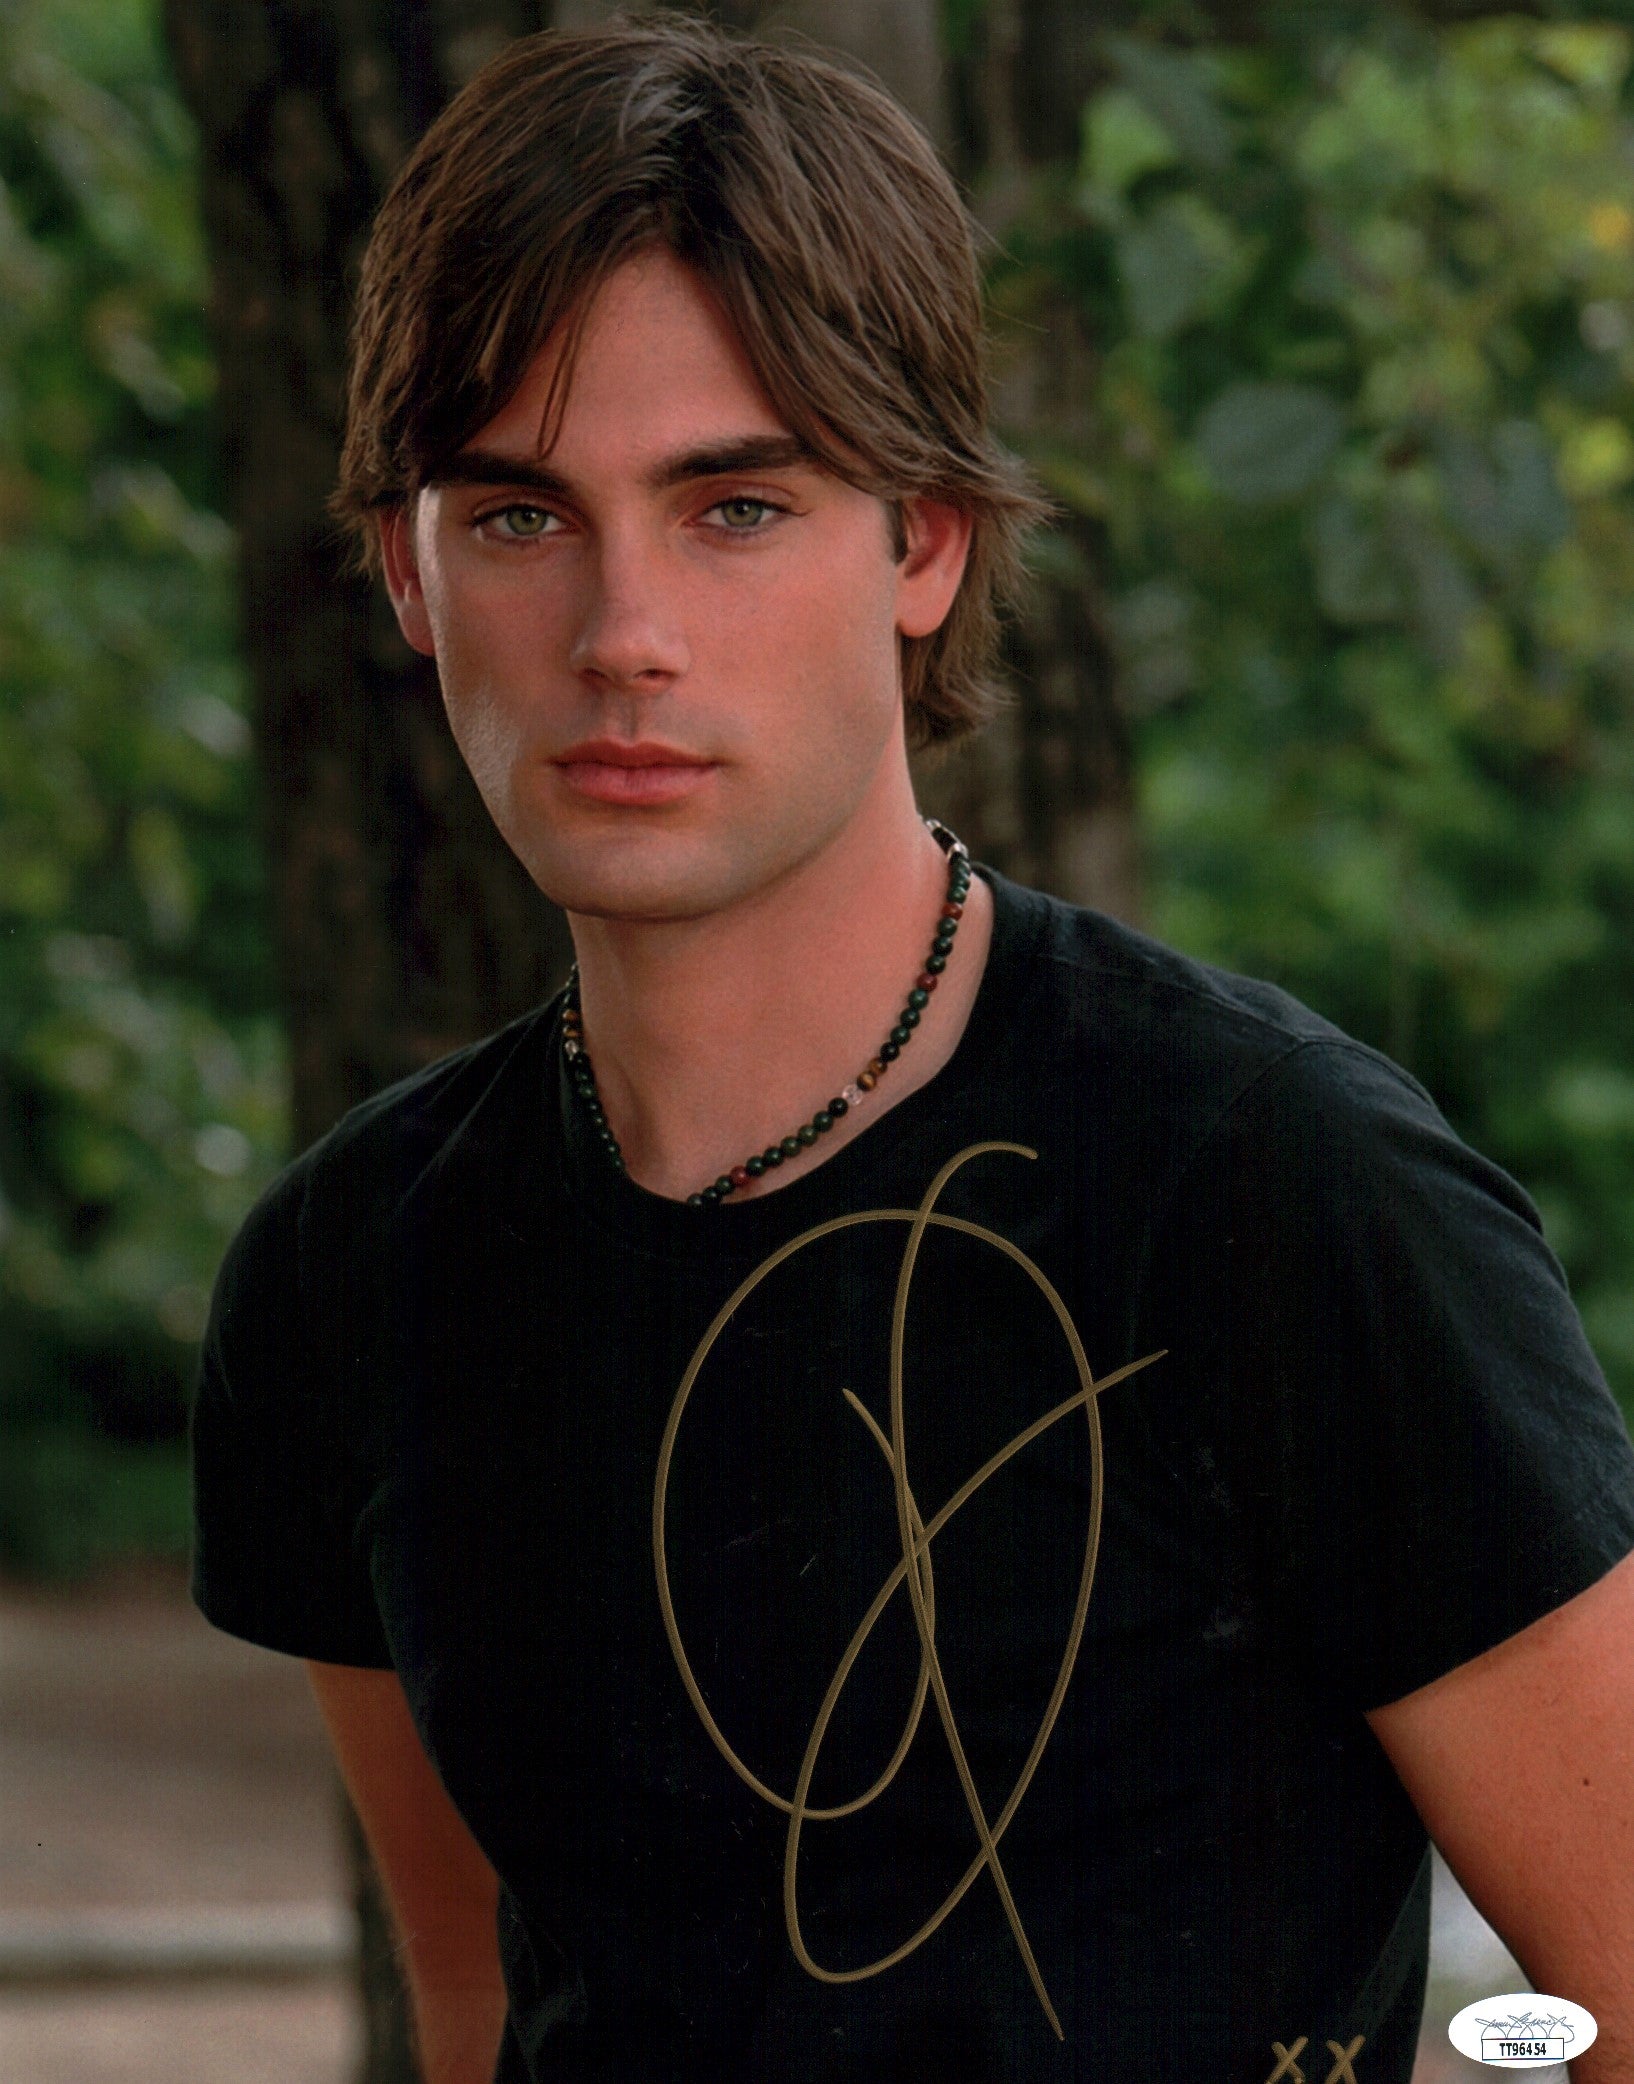 Drew Fuller Charmed 11x14 Photo Poster Signed Autograph JSA Certified COA Auto GalaxyCon